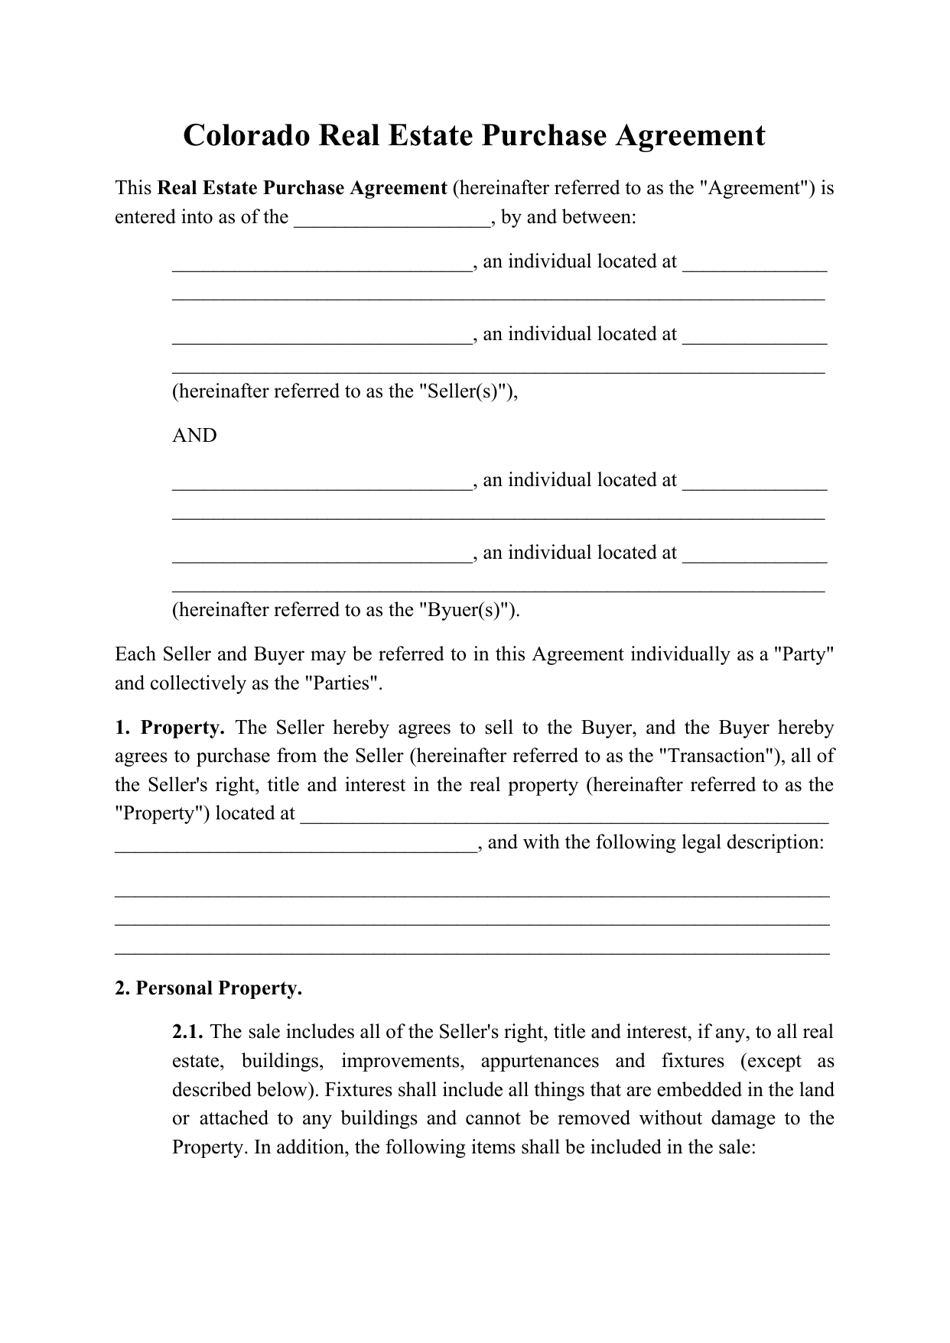 Colorado Real Estate Purchase Agreement Template Fill Out Sign